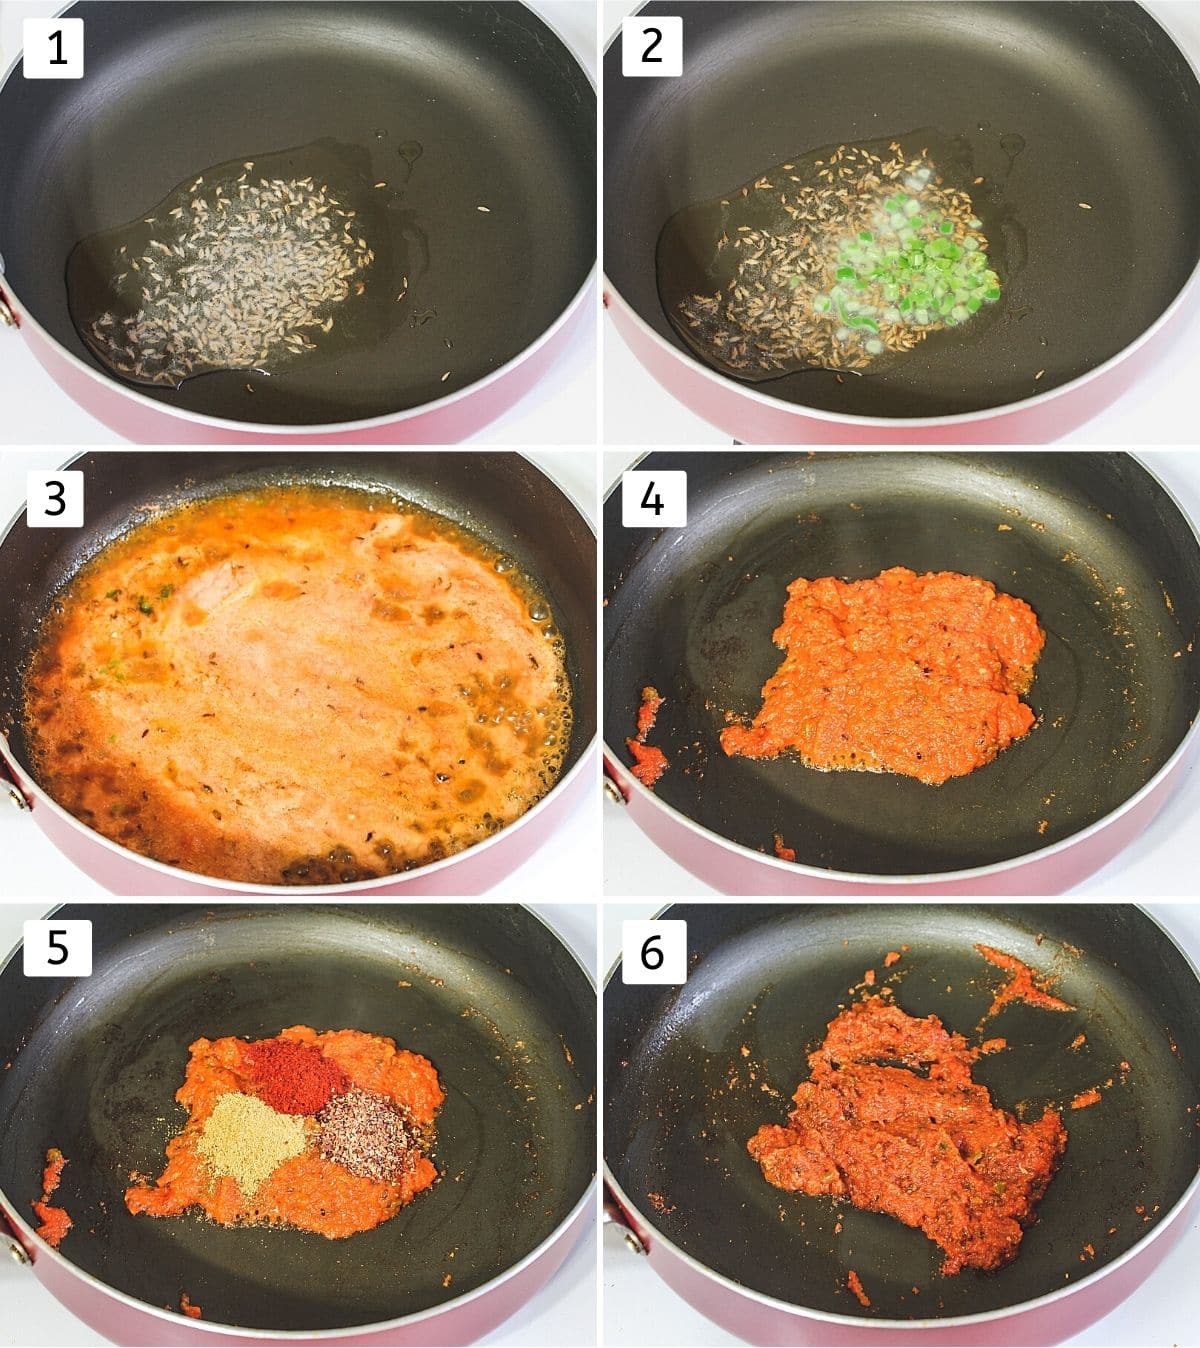 Collage of 6 steps showing saute cumin seeds, saute green chilies, adding tomato puree, cooking, adding spices and mixed.